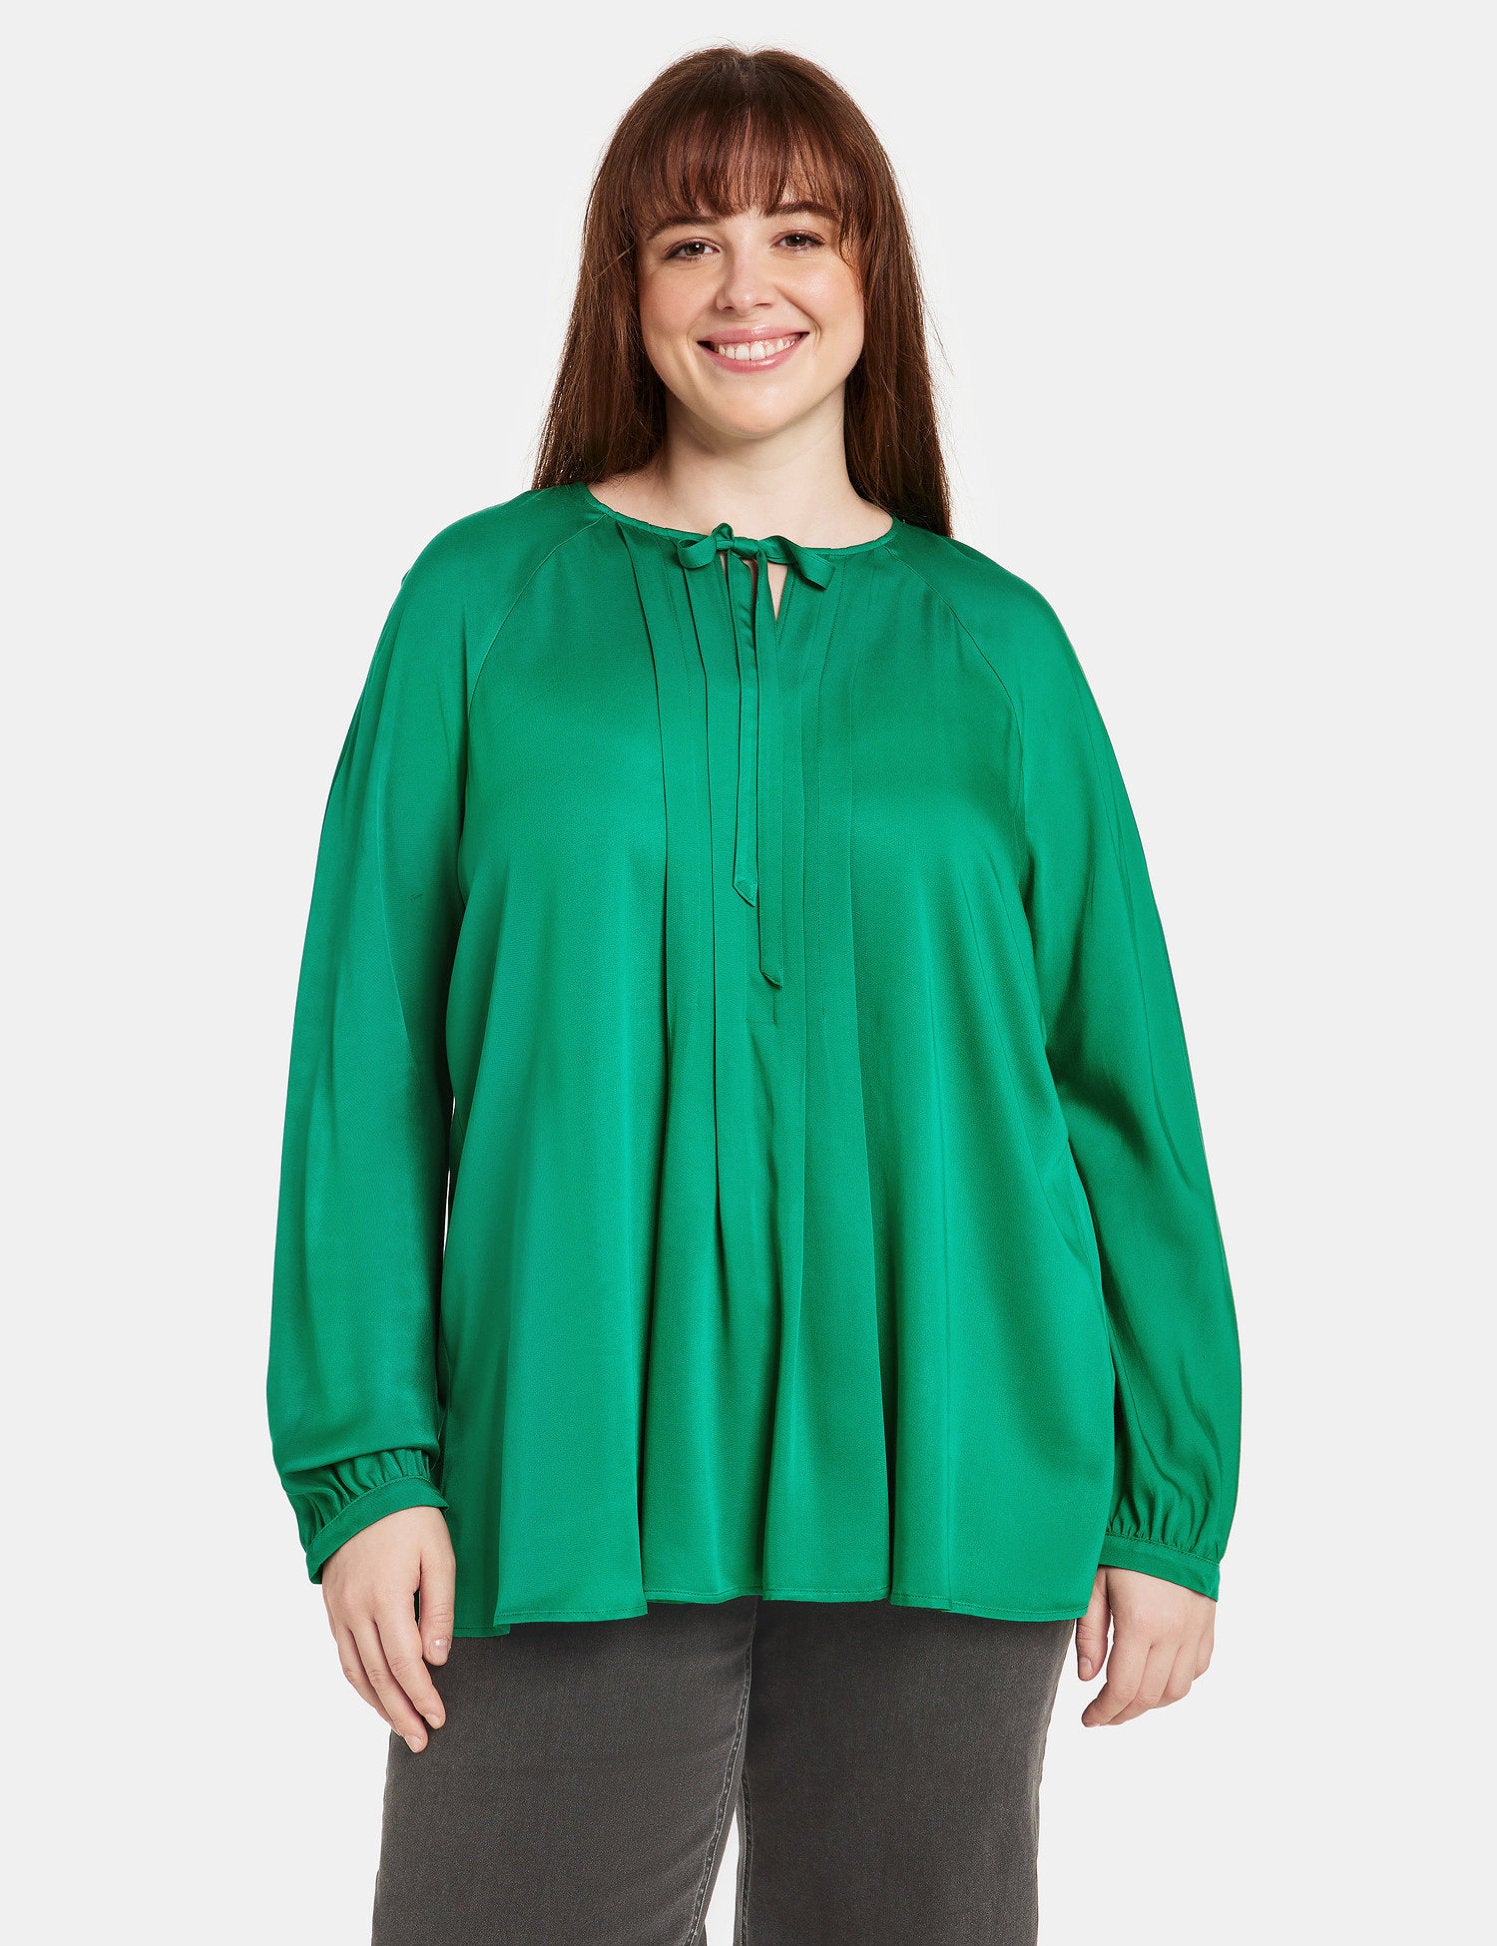 Blouse With A Pintuck Panel_360207-21212_5550_07